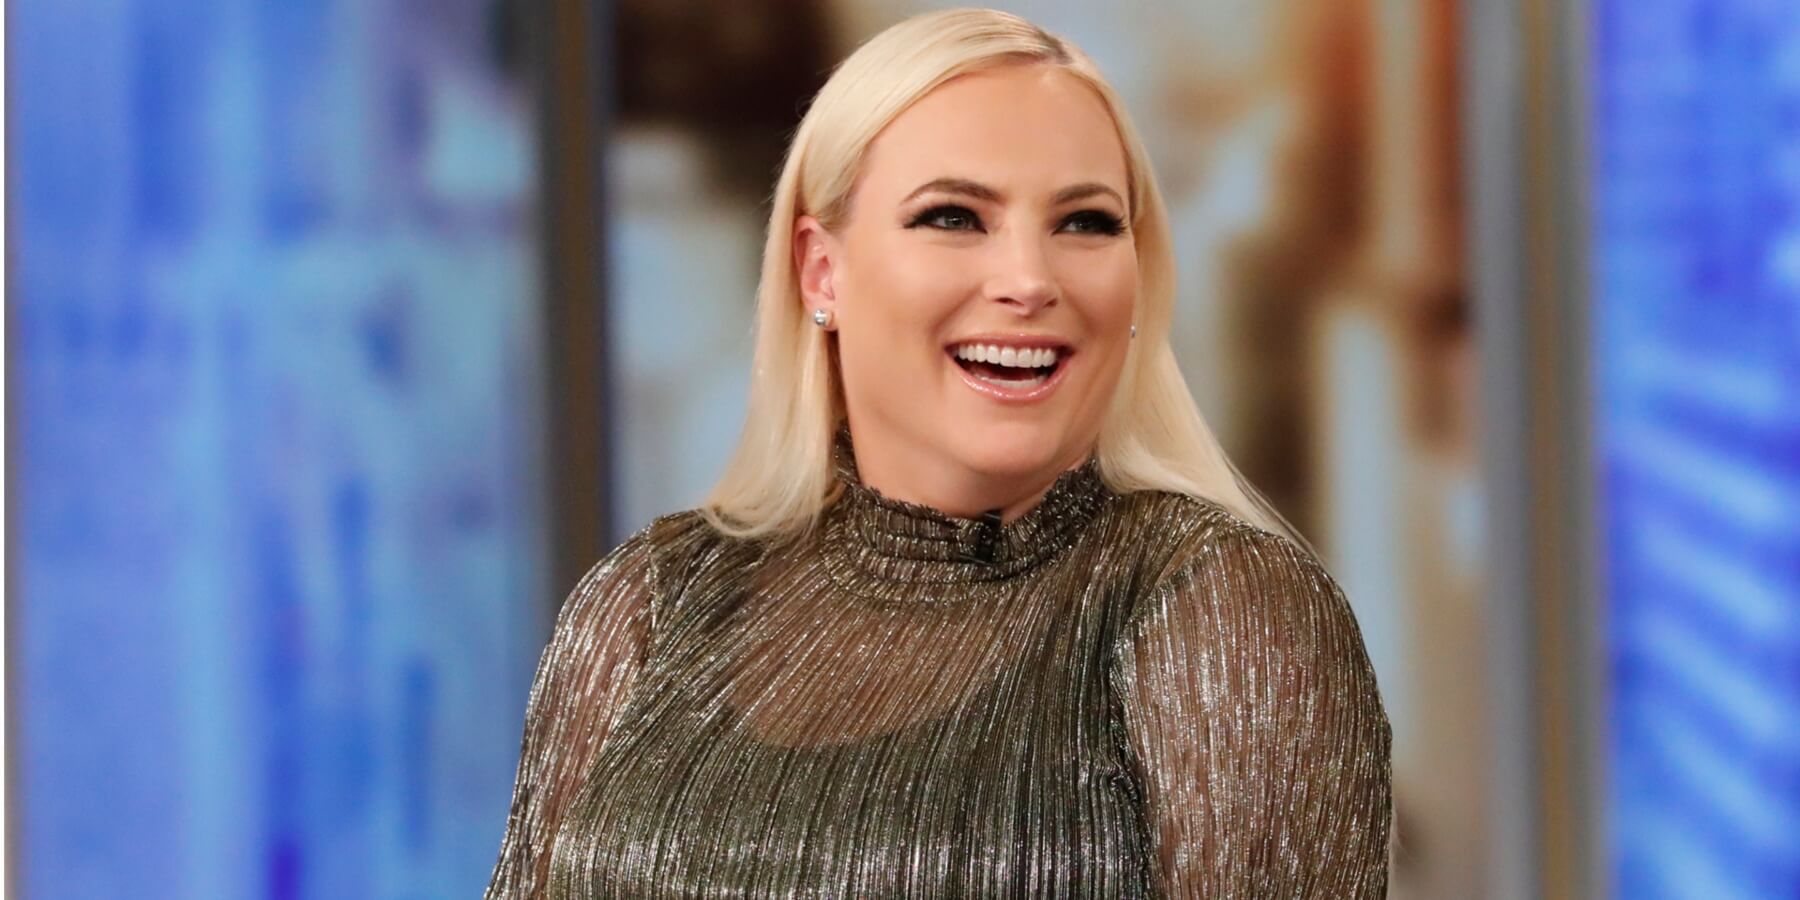 Meghan McCain was a panelist on ABC's 'The View' for four years.